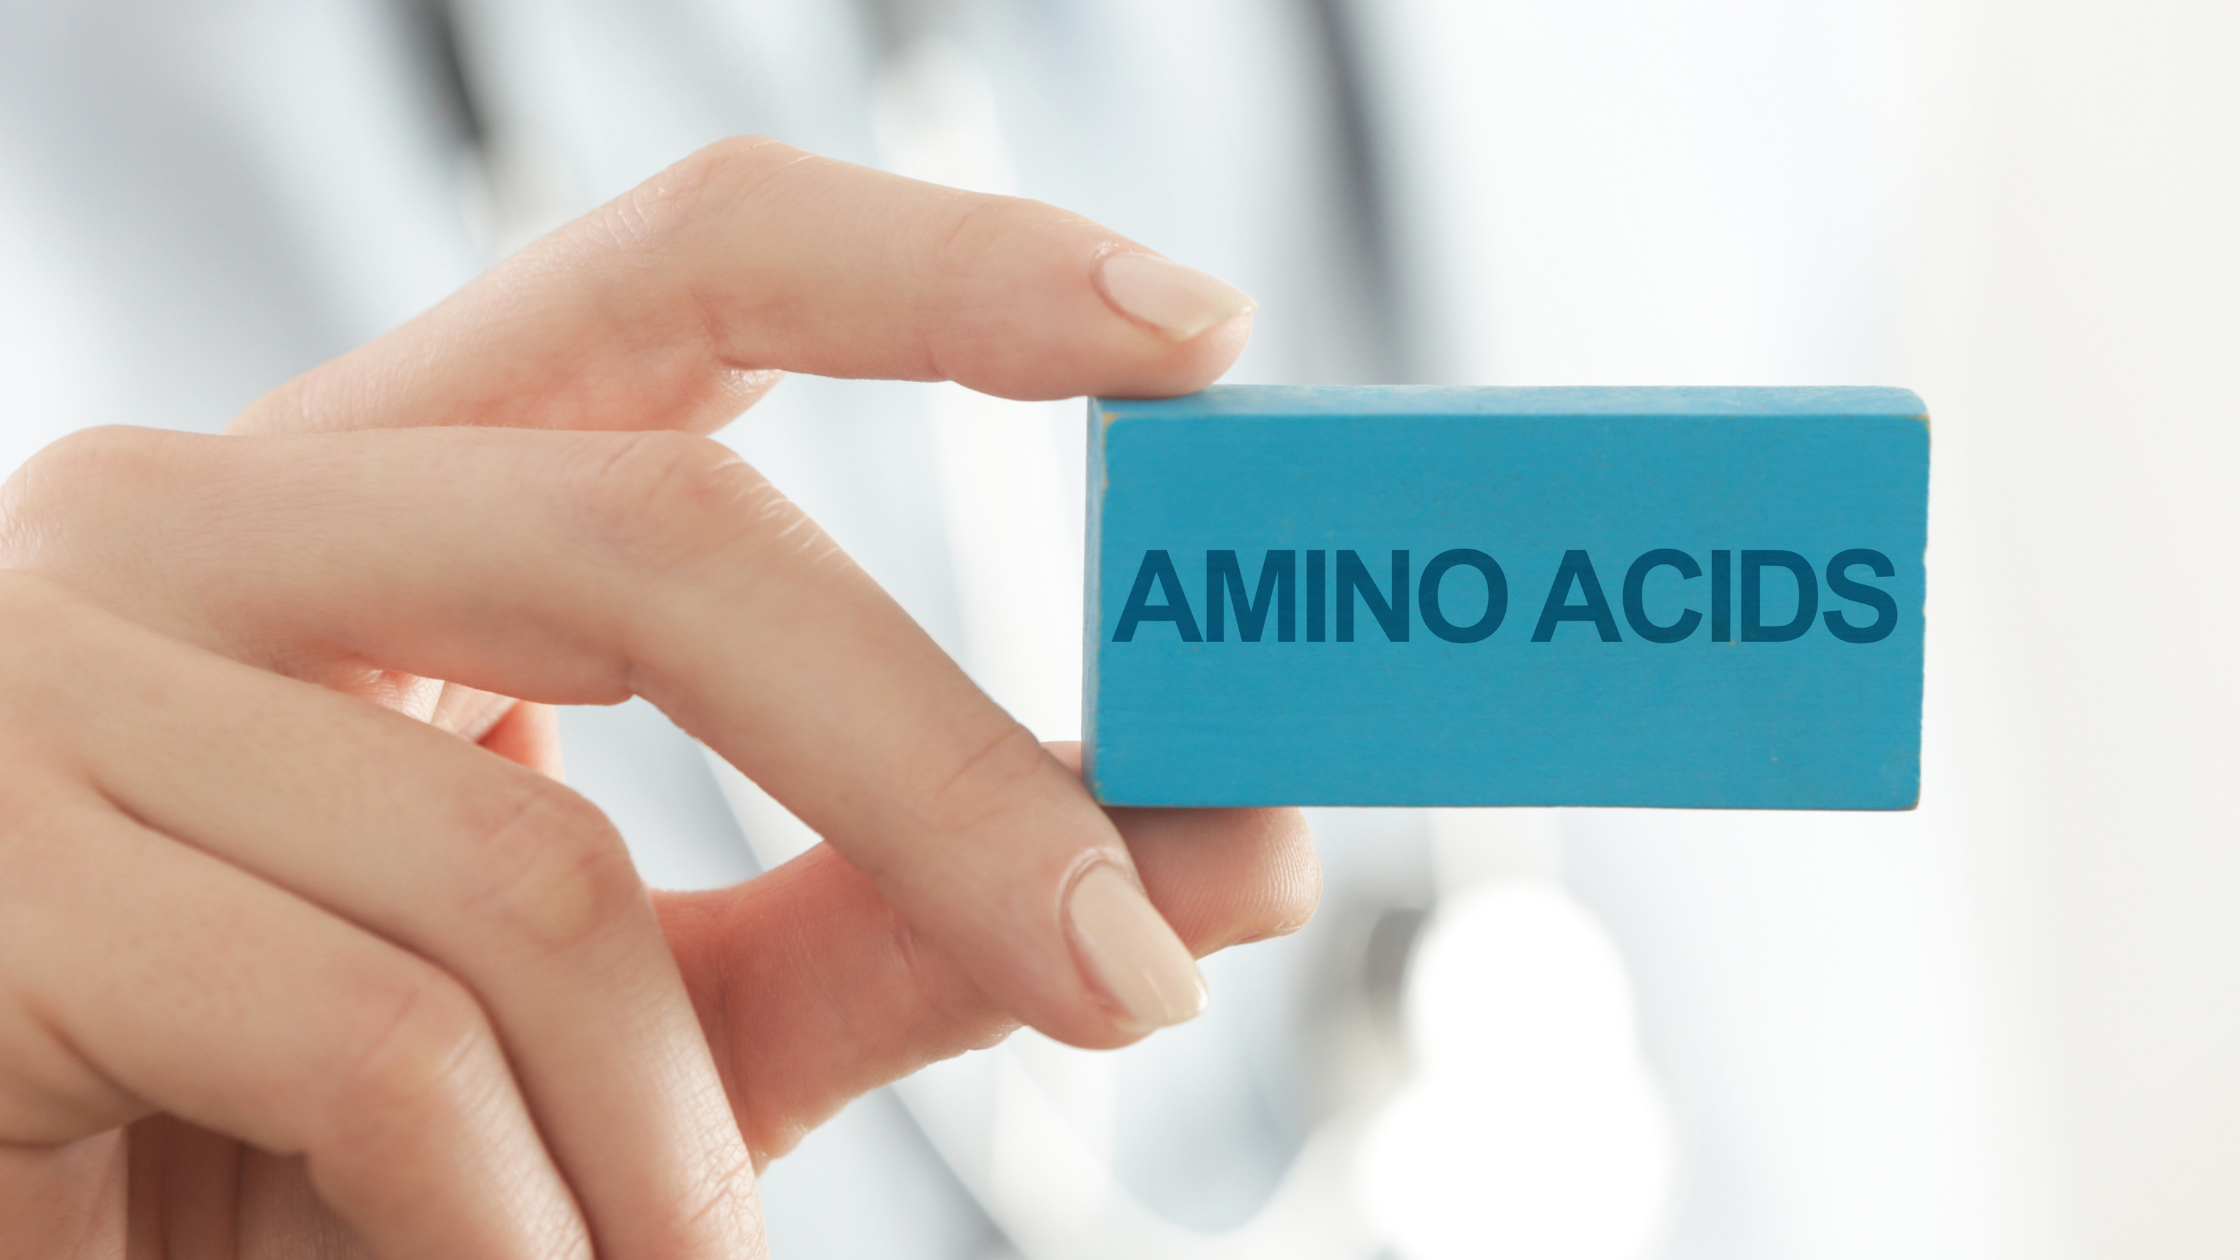 Function of amino acids for the skin